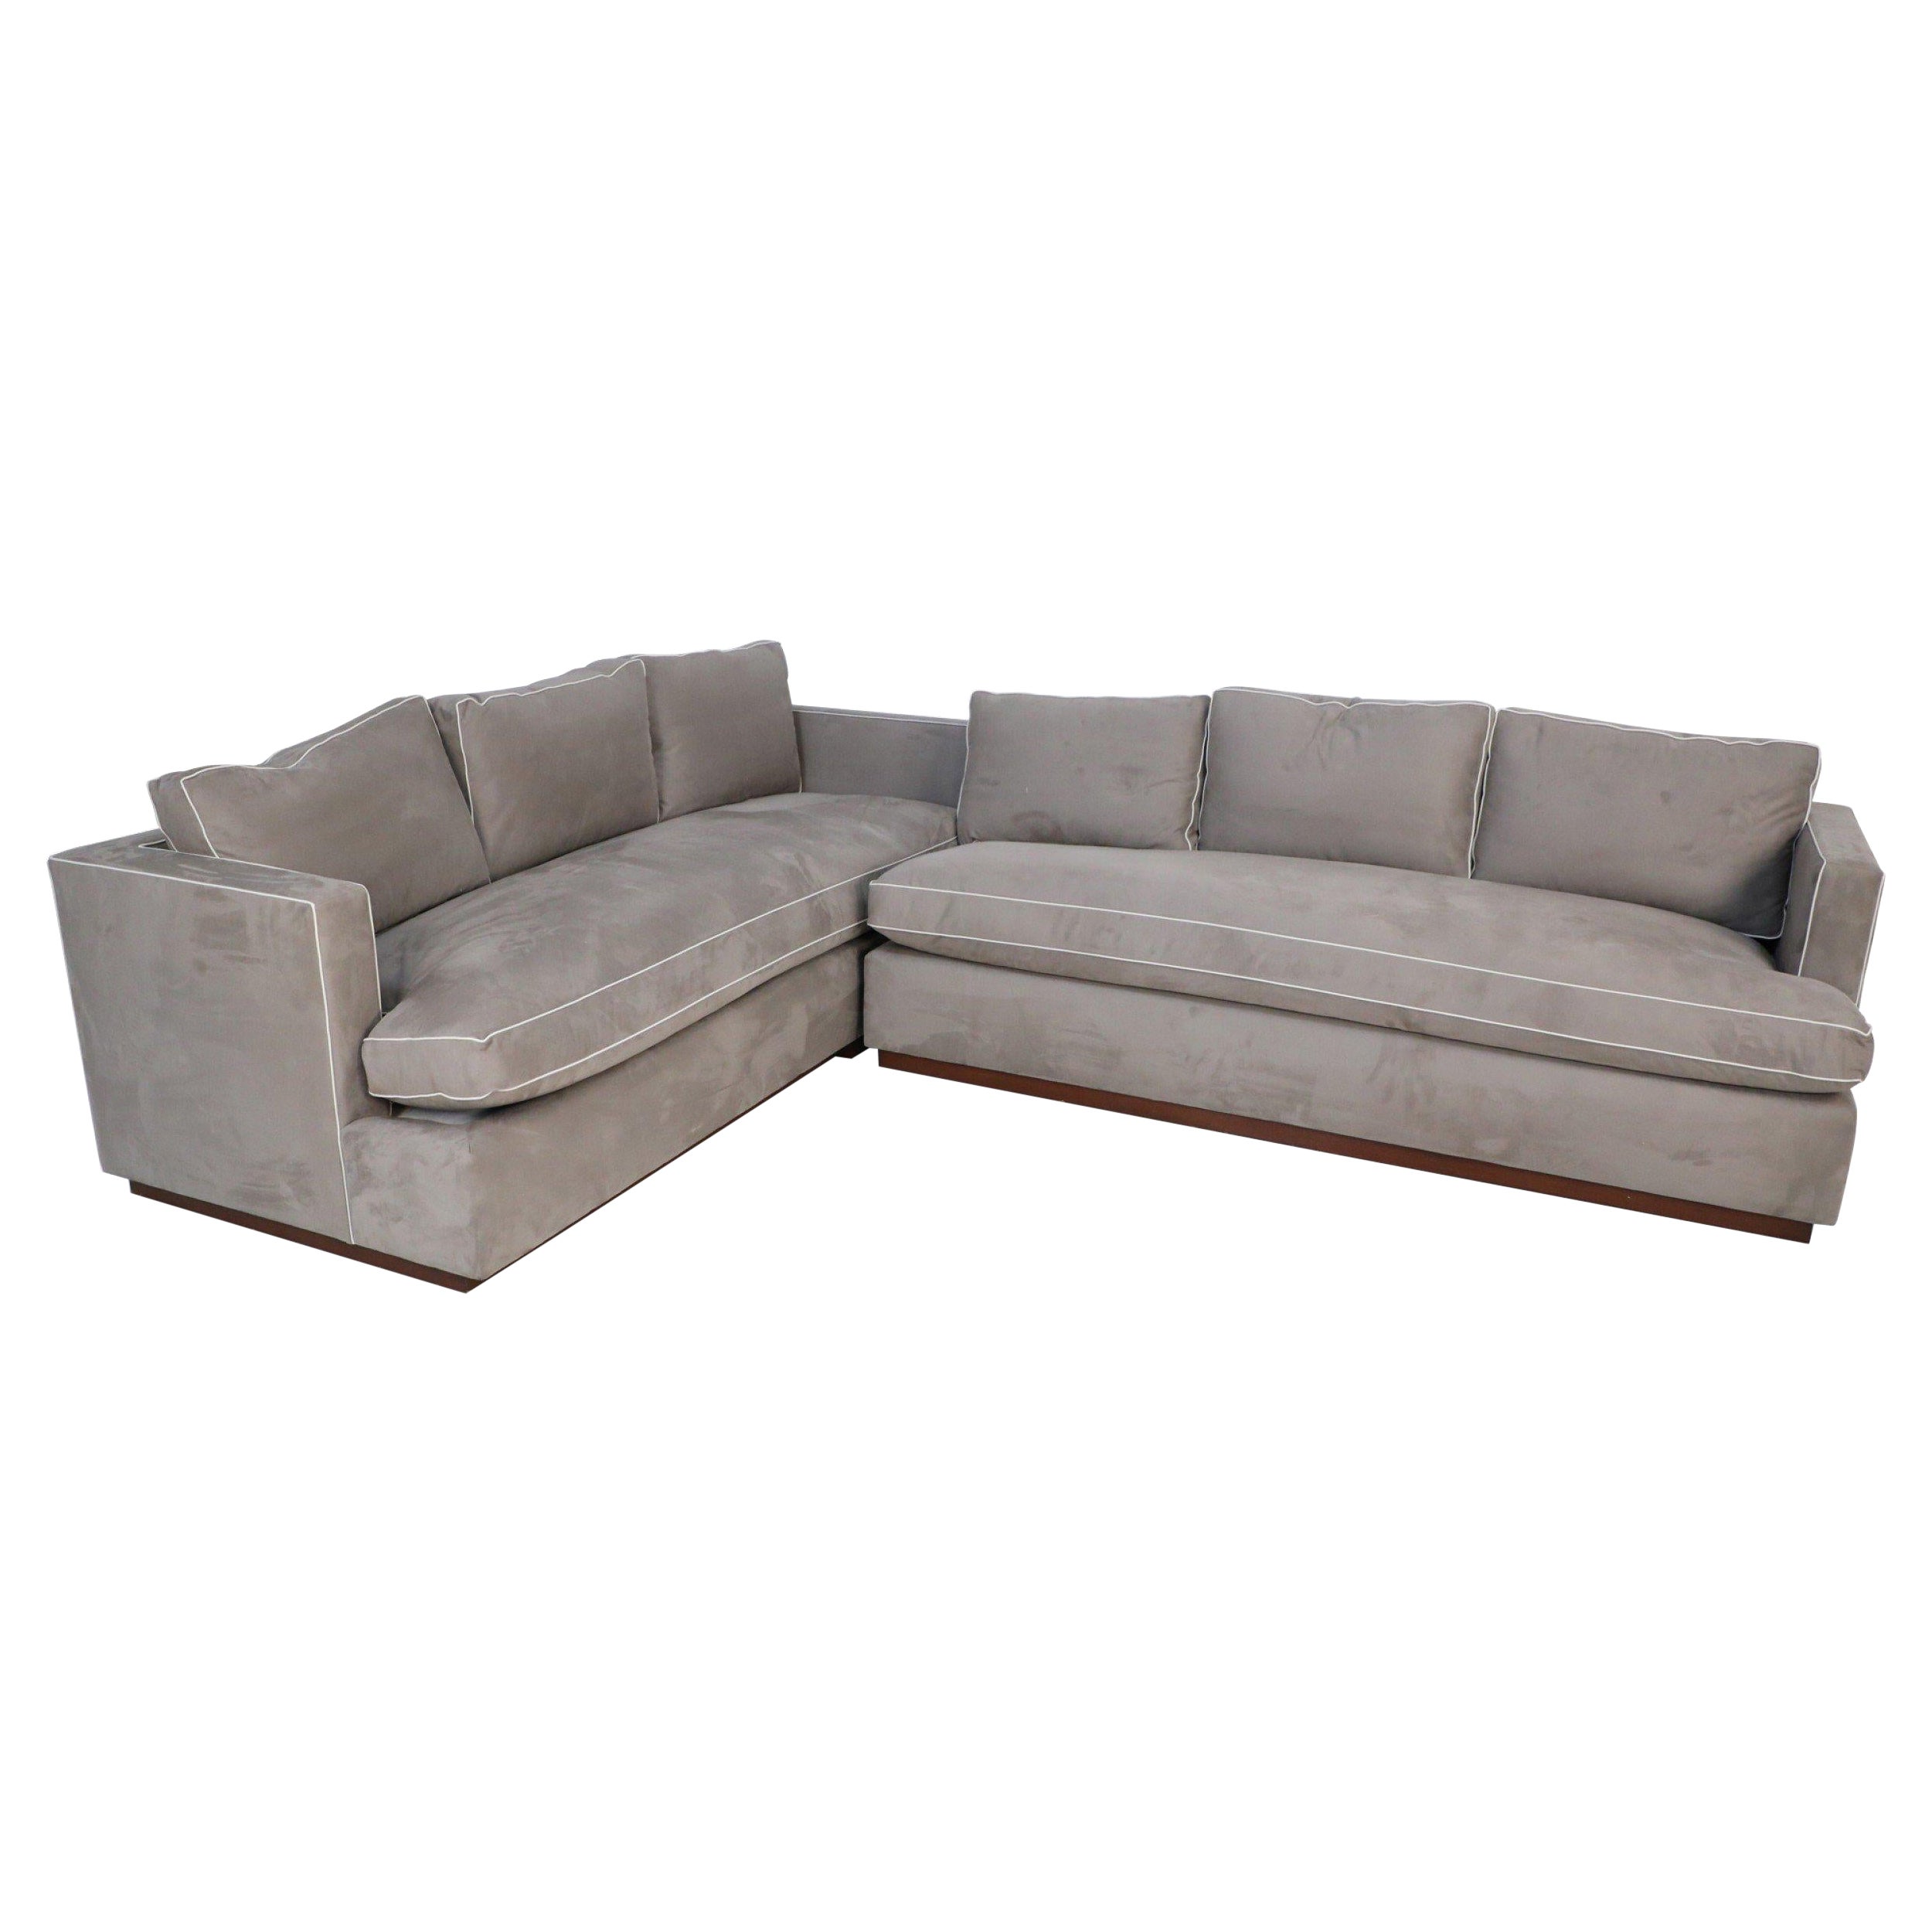 Pair of Contemporary Overstuffed Gray Ultrasuede and Leather Sofas